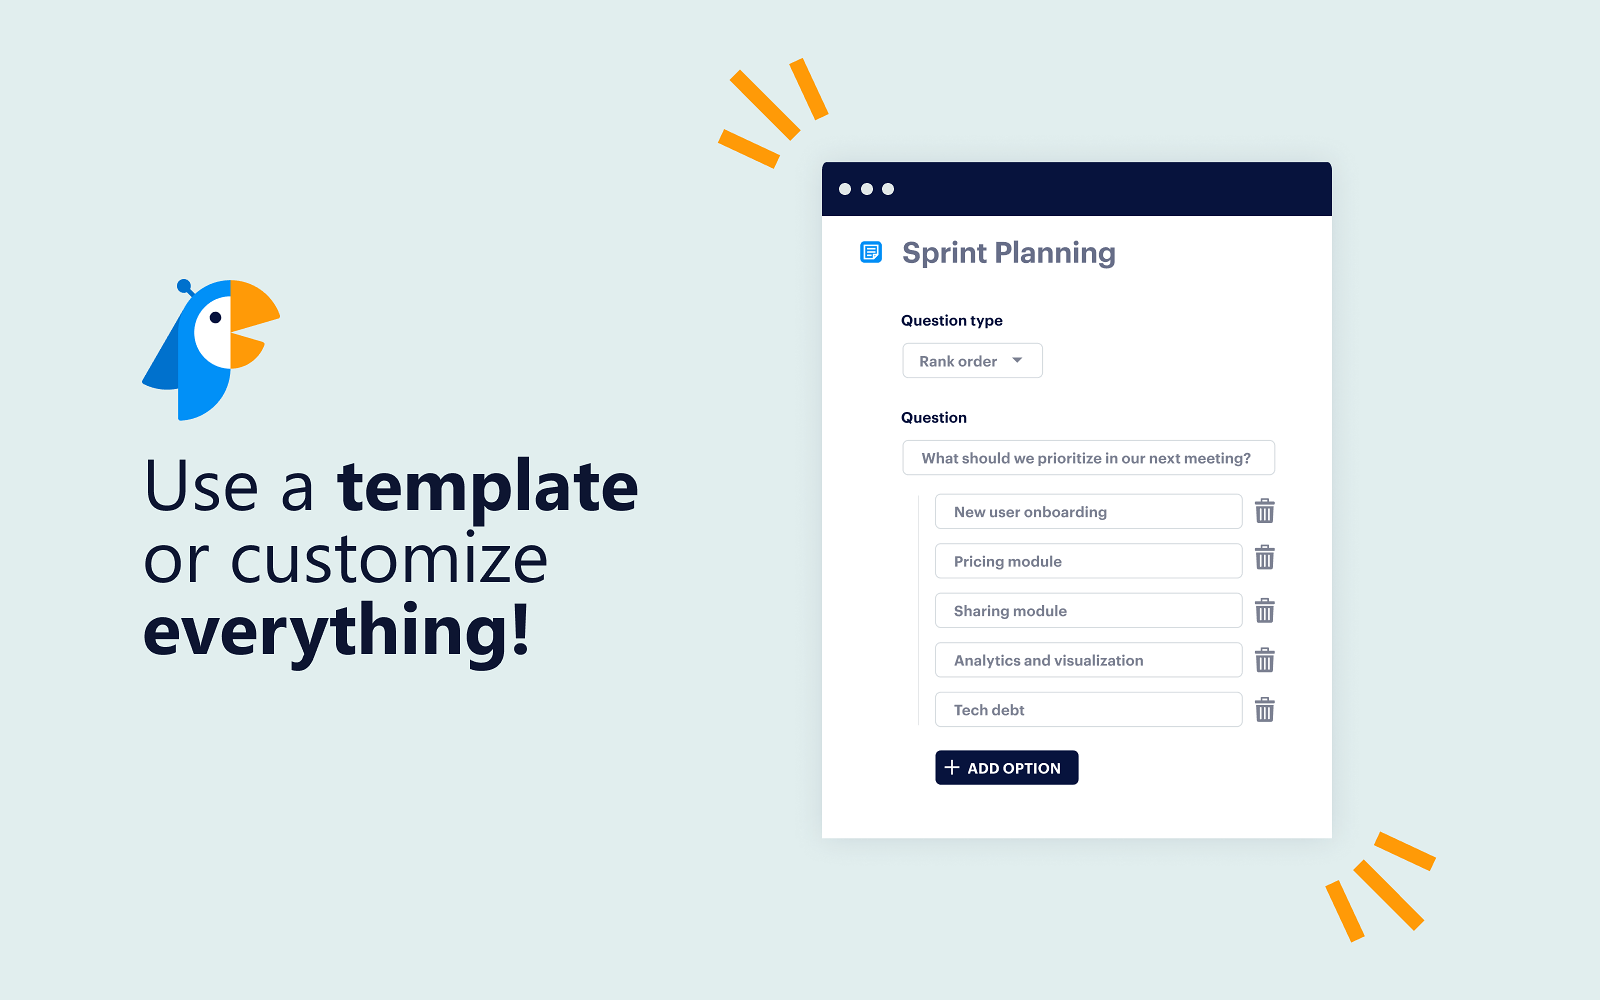 Leverage over 20 expert-produced templates in Polly for Slack & Teams or create your own to get better feedback.